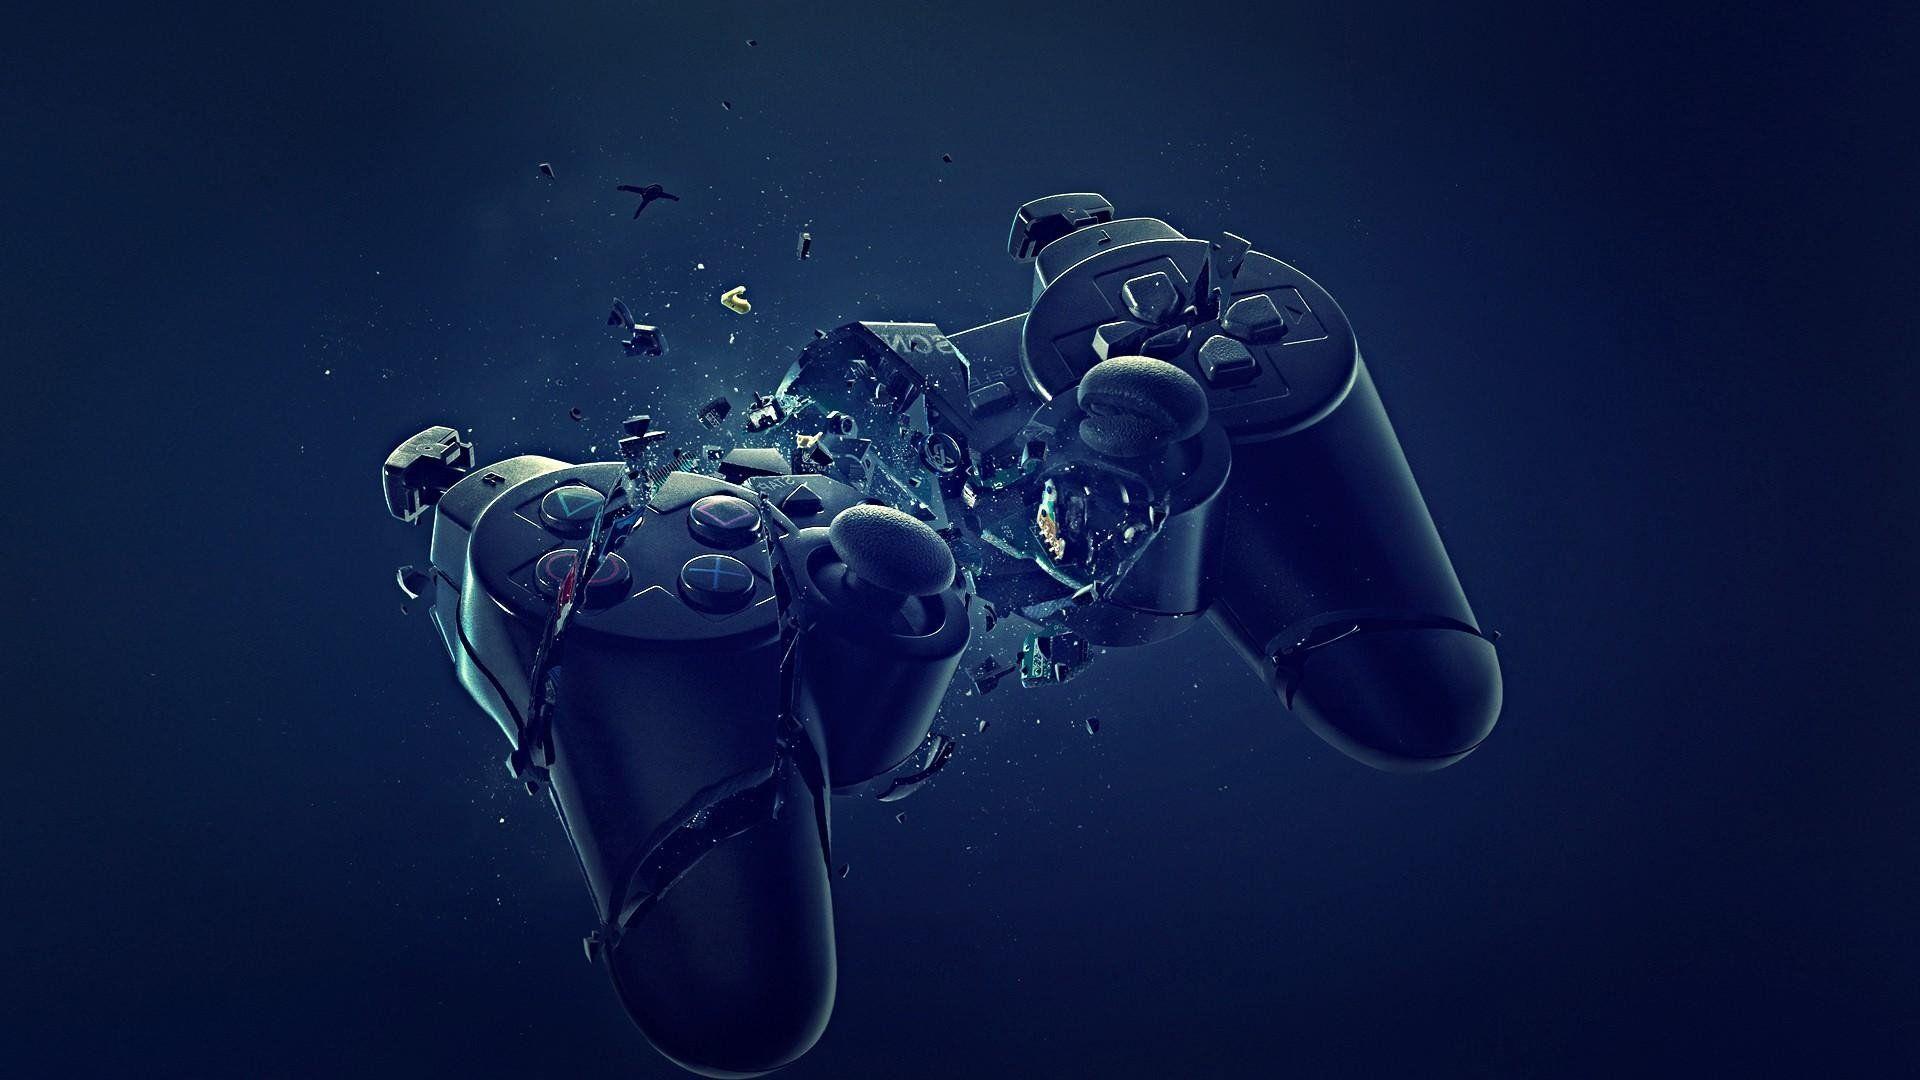 PS4 Controller Wallpapers - Top Free PS4 Controller ...